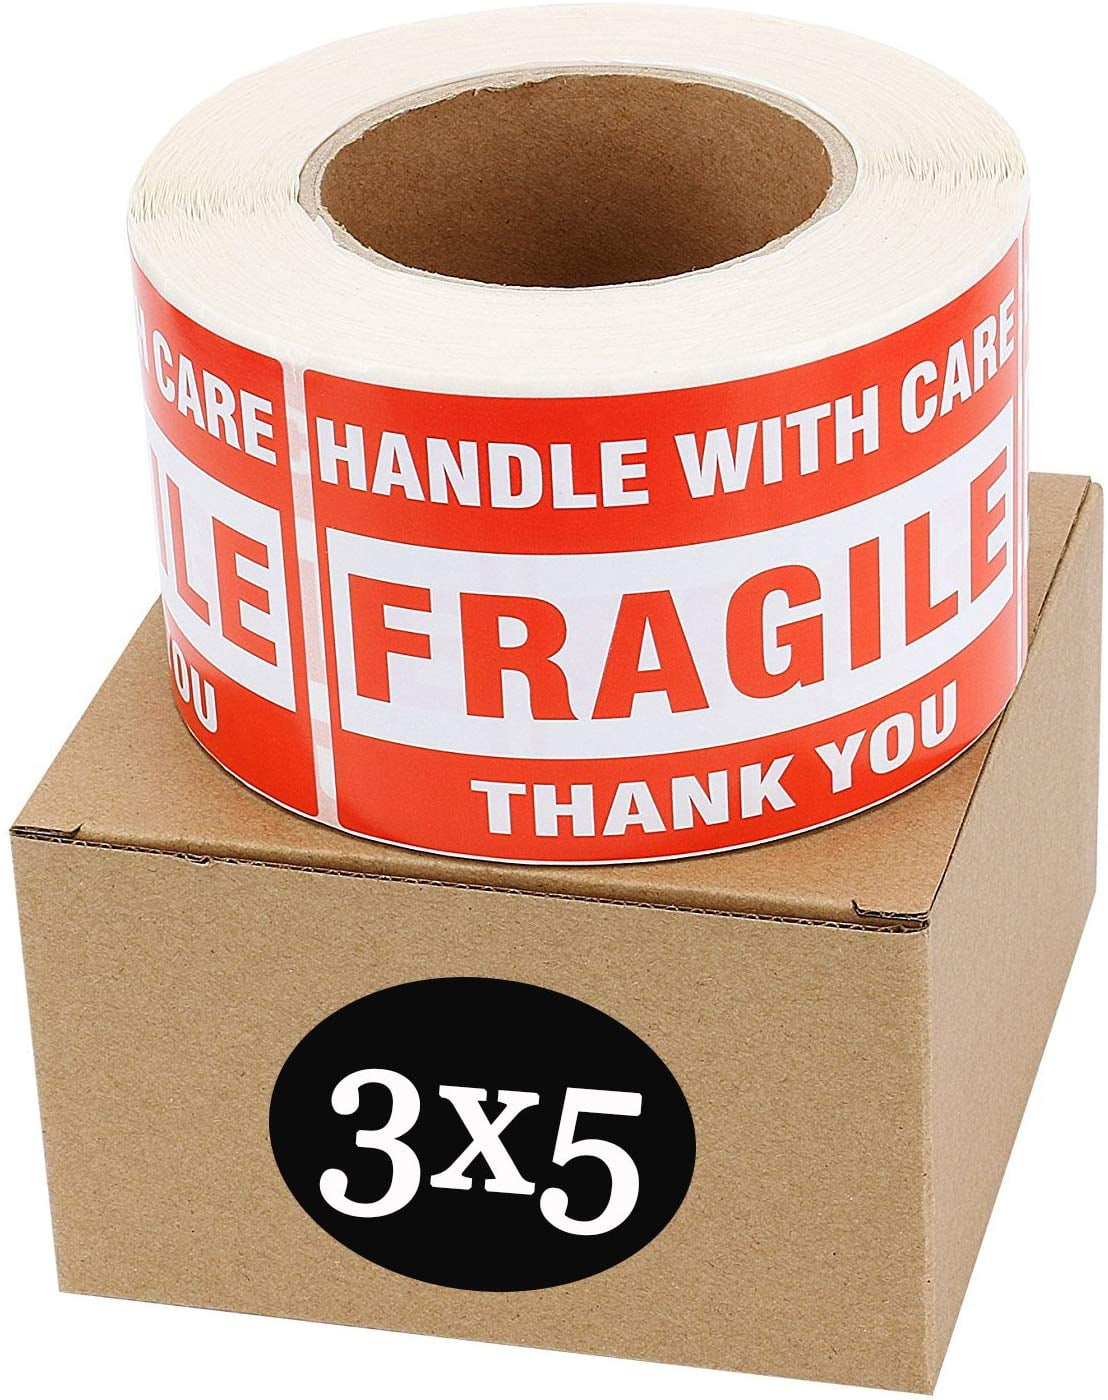 1000 1 x 3" inch Fragile Handle with Care Shipping Box Sticker Labels 1 Roll 